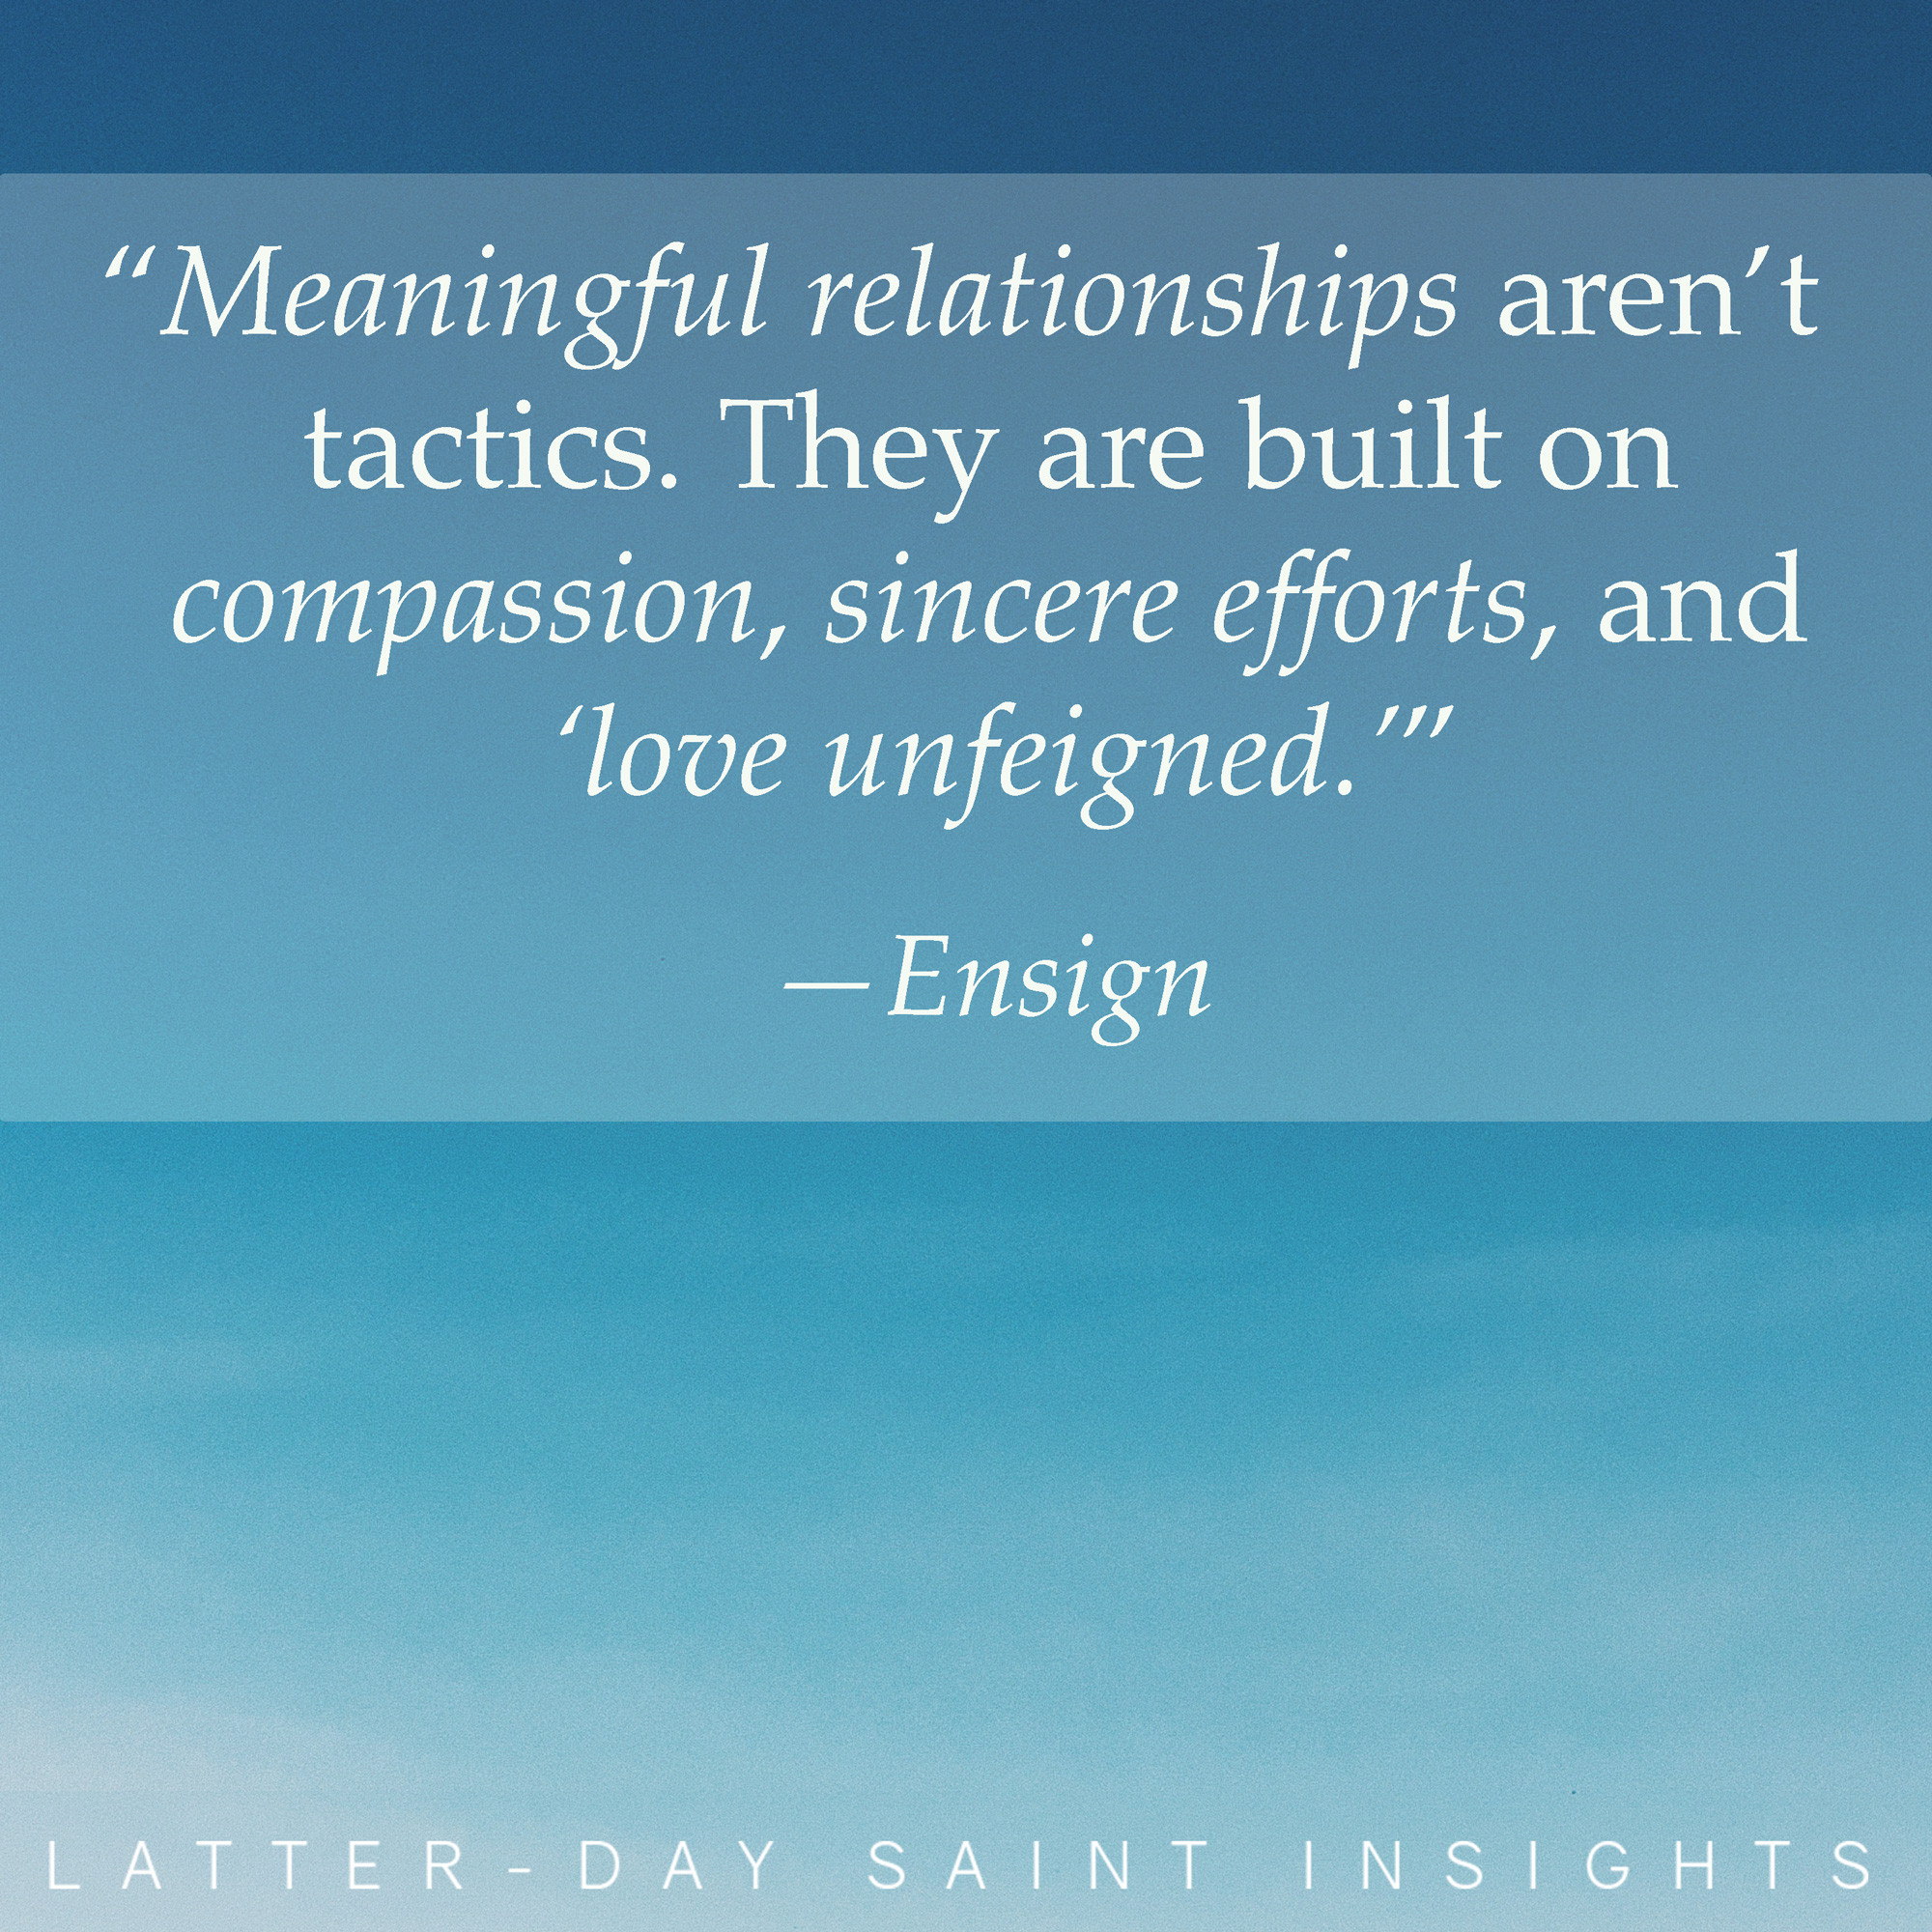 "Meaningful relationships aren't tactics. They are built on compassion, sincere efforts, and 'love unfettered.'" - Ensign